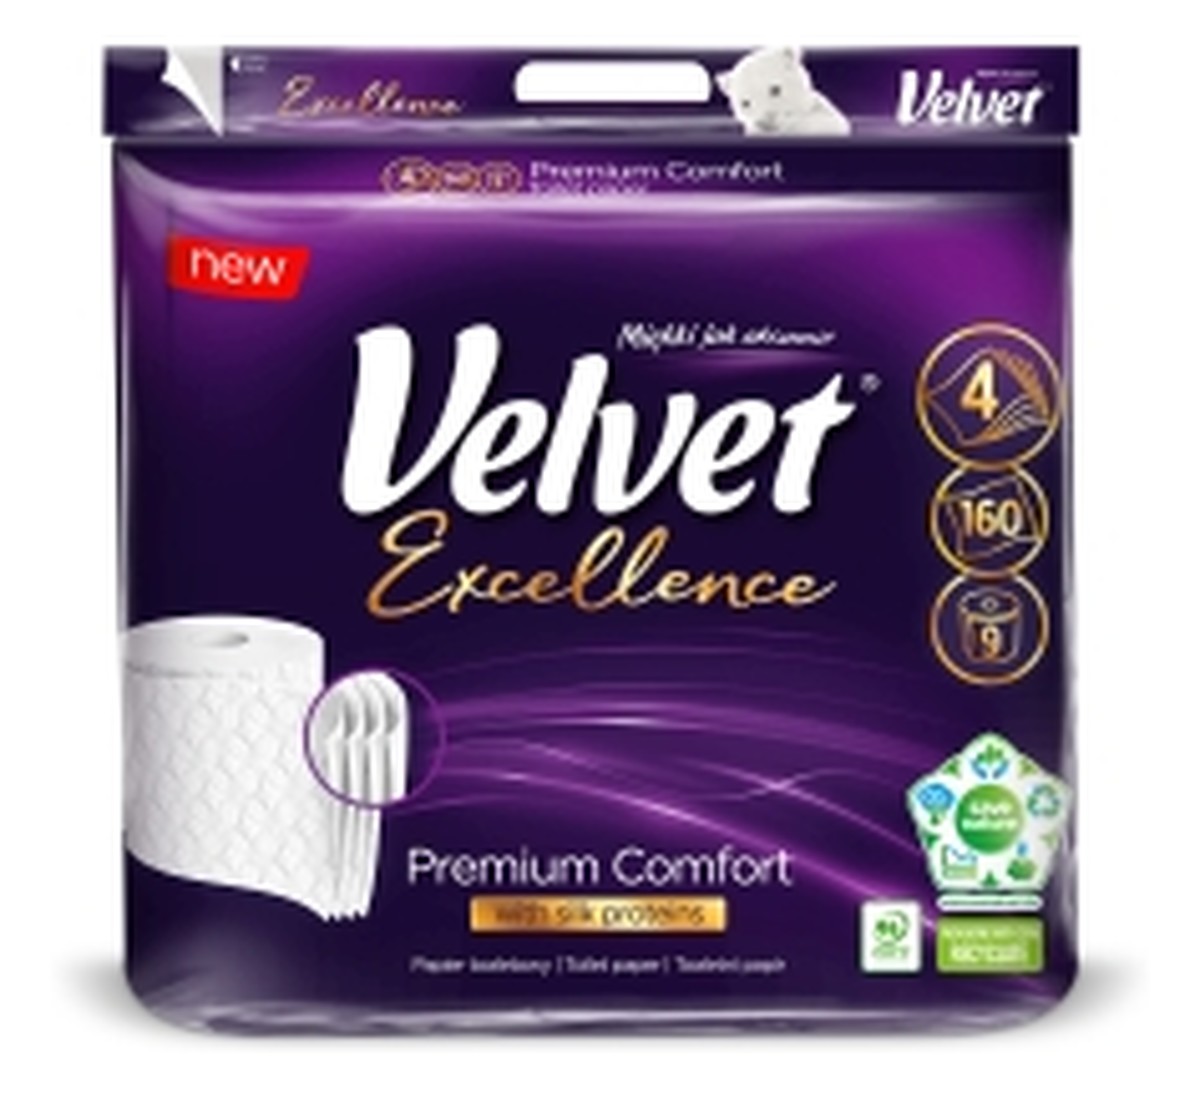 PAPIER TOALETOWY ( 9) EXCELLENCE PREMIUM COMFORT